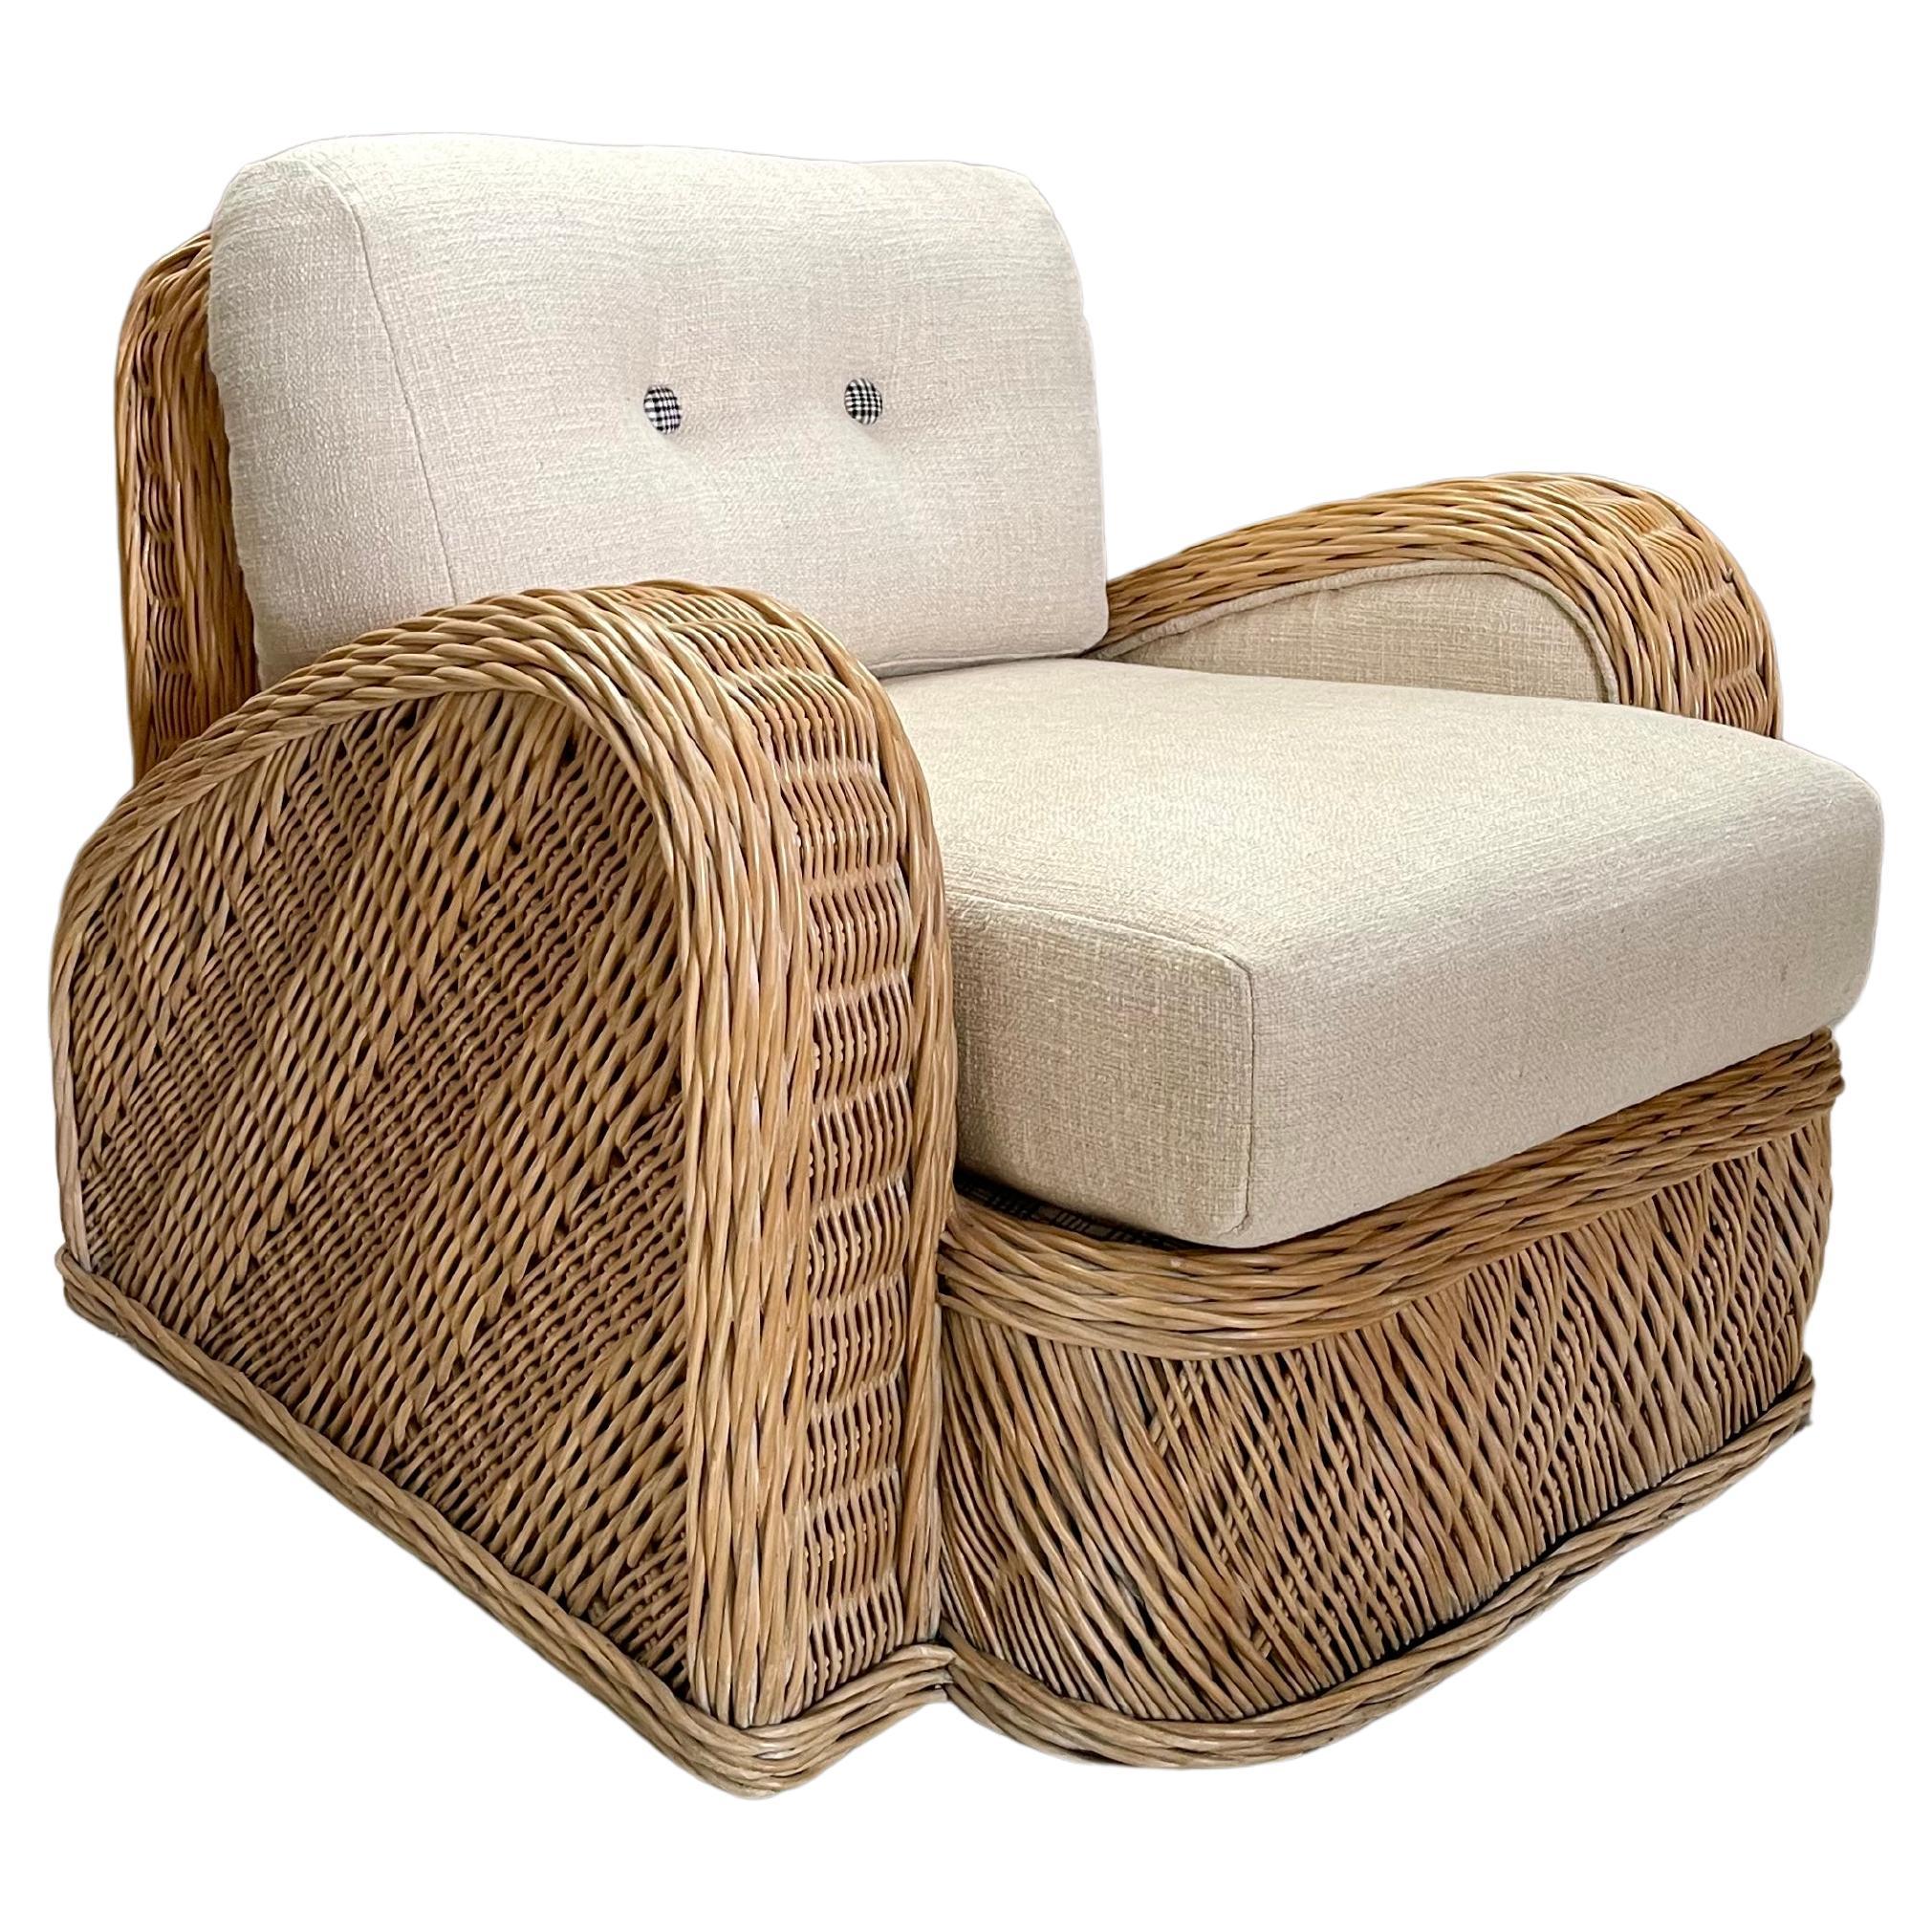 Jay Spectre Wicker Postmodern Chair, New Upholstery, Performance Fabric For Sale